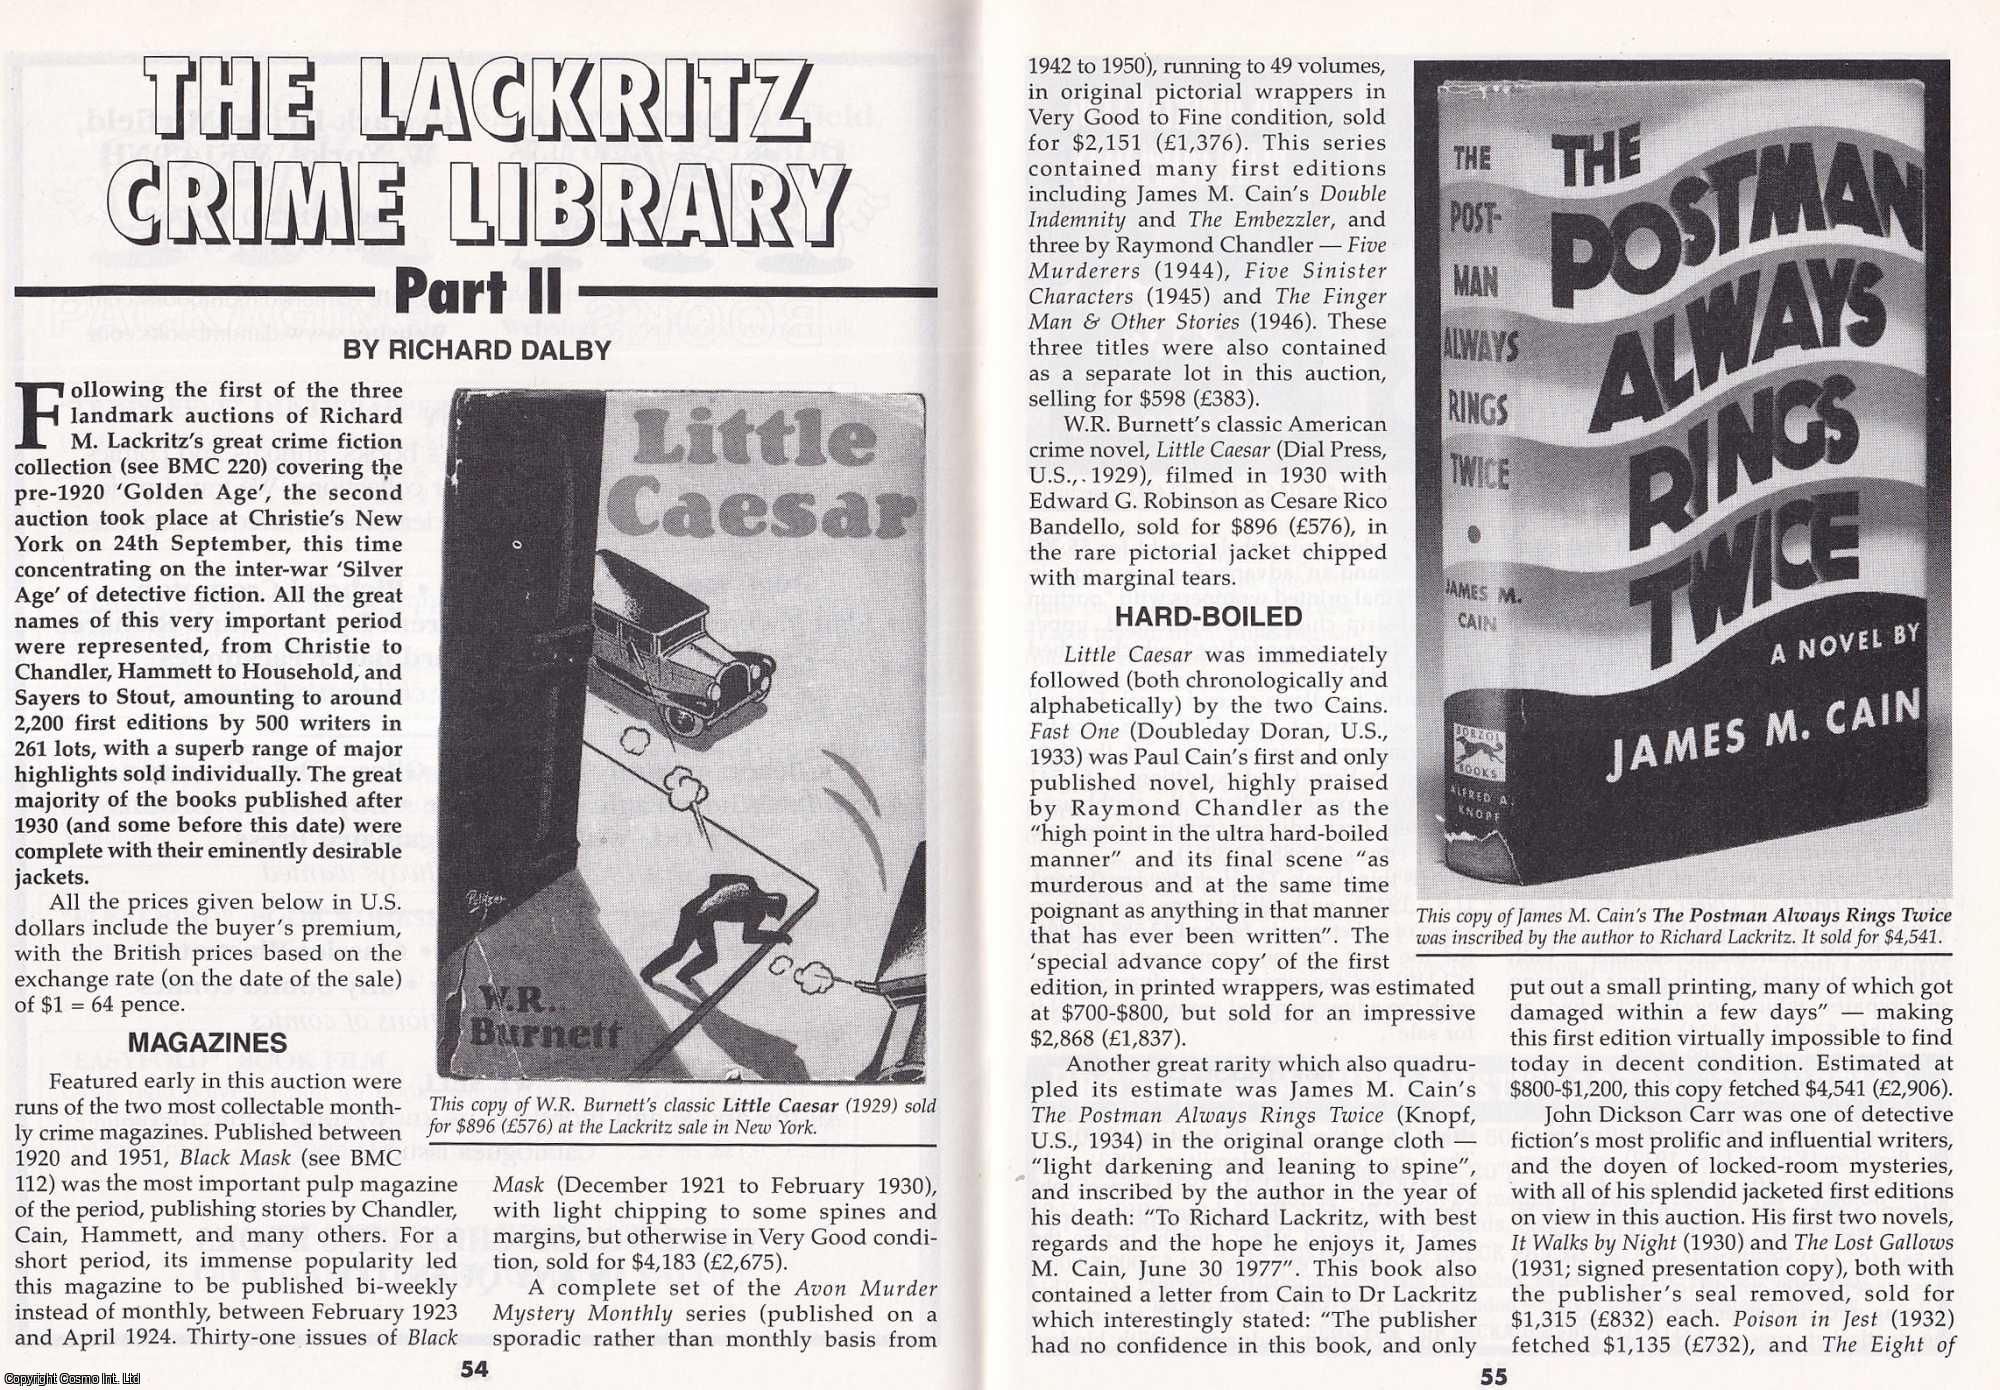 Richard Dalby - The Lackritz Crime Library. Part II. This is an original article separated from an issue of The Book & Magazine Collector publication.